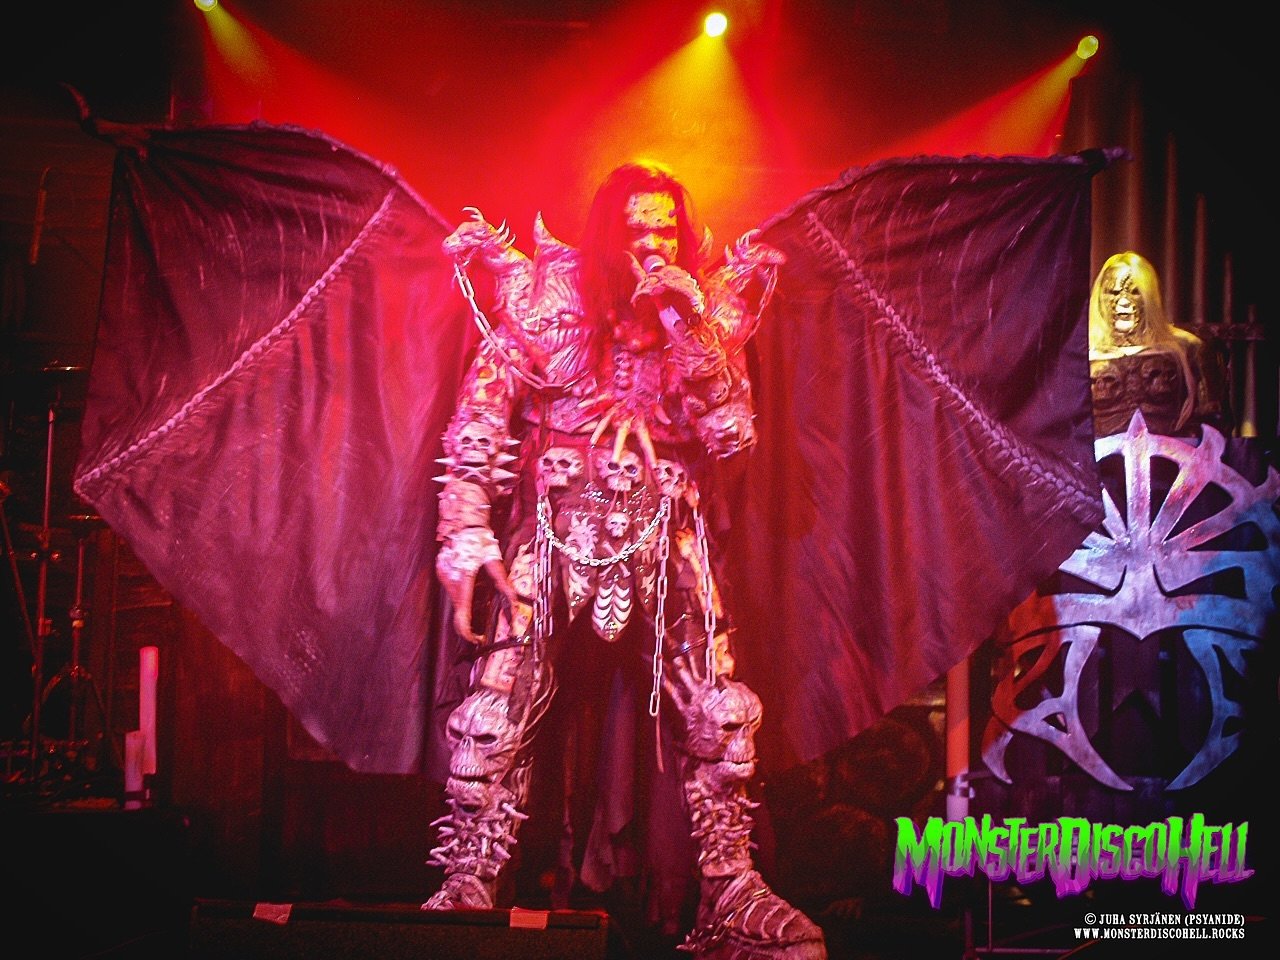 It&rsquo;s Throwback Thursday again! Here&rsquo;s another blast from the past, from almost 20 years ago when Lordi spread his iconic wings at The Monsterican Dream album release show at Nosturi, Helsinki on May 13th 2004. As we all know, it&rsquo;s t